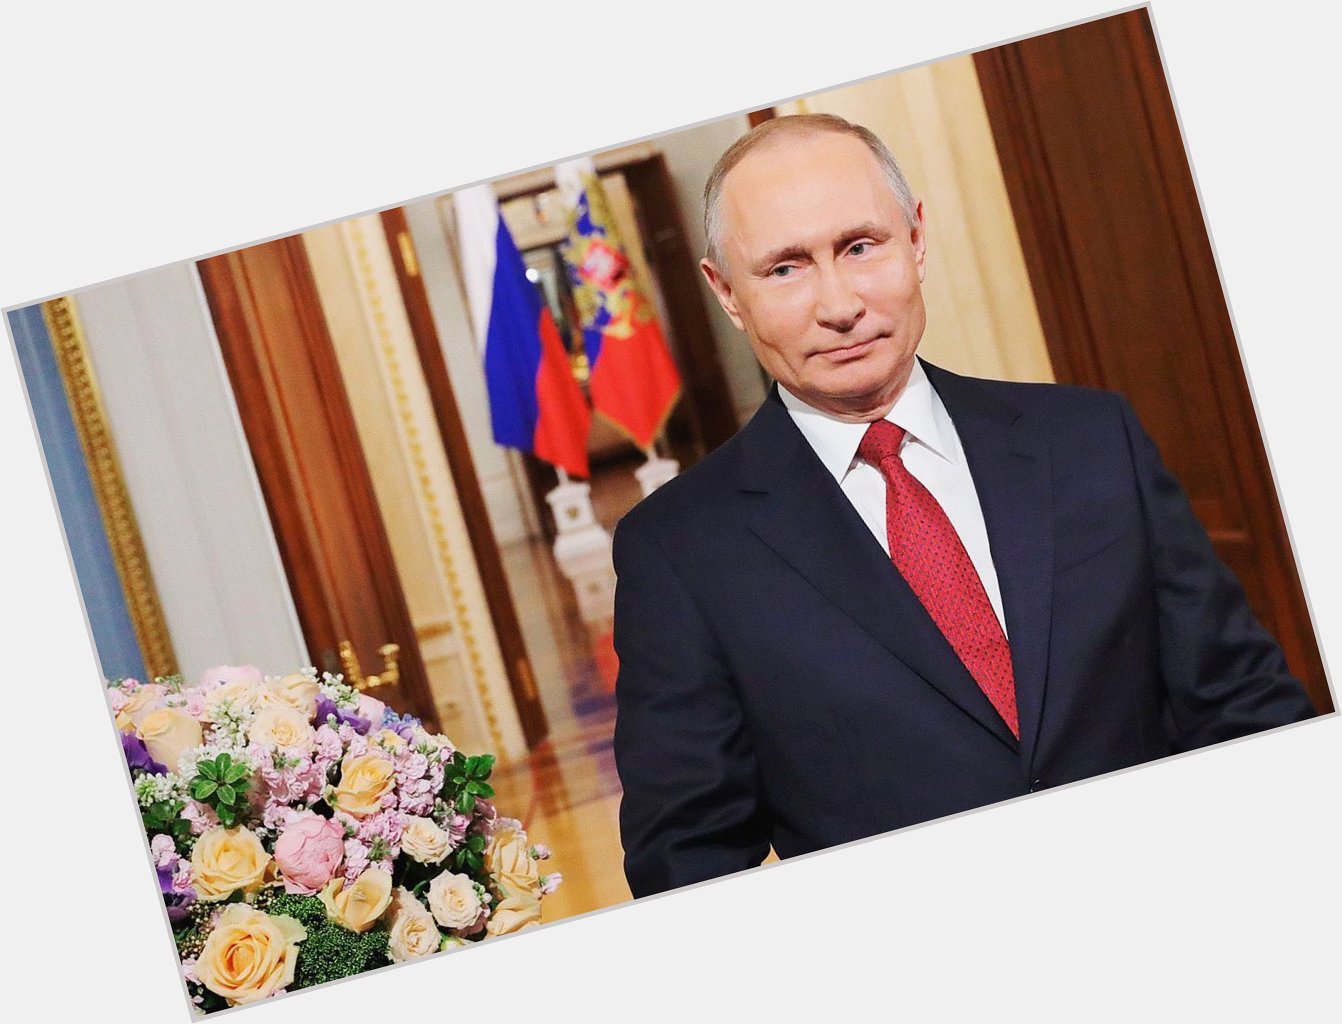 Happy Birthday To The President of Russia Vladimir Putin. Stay blessed . 